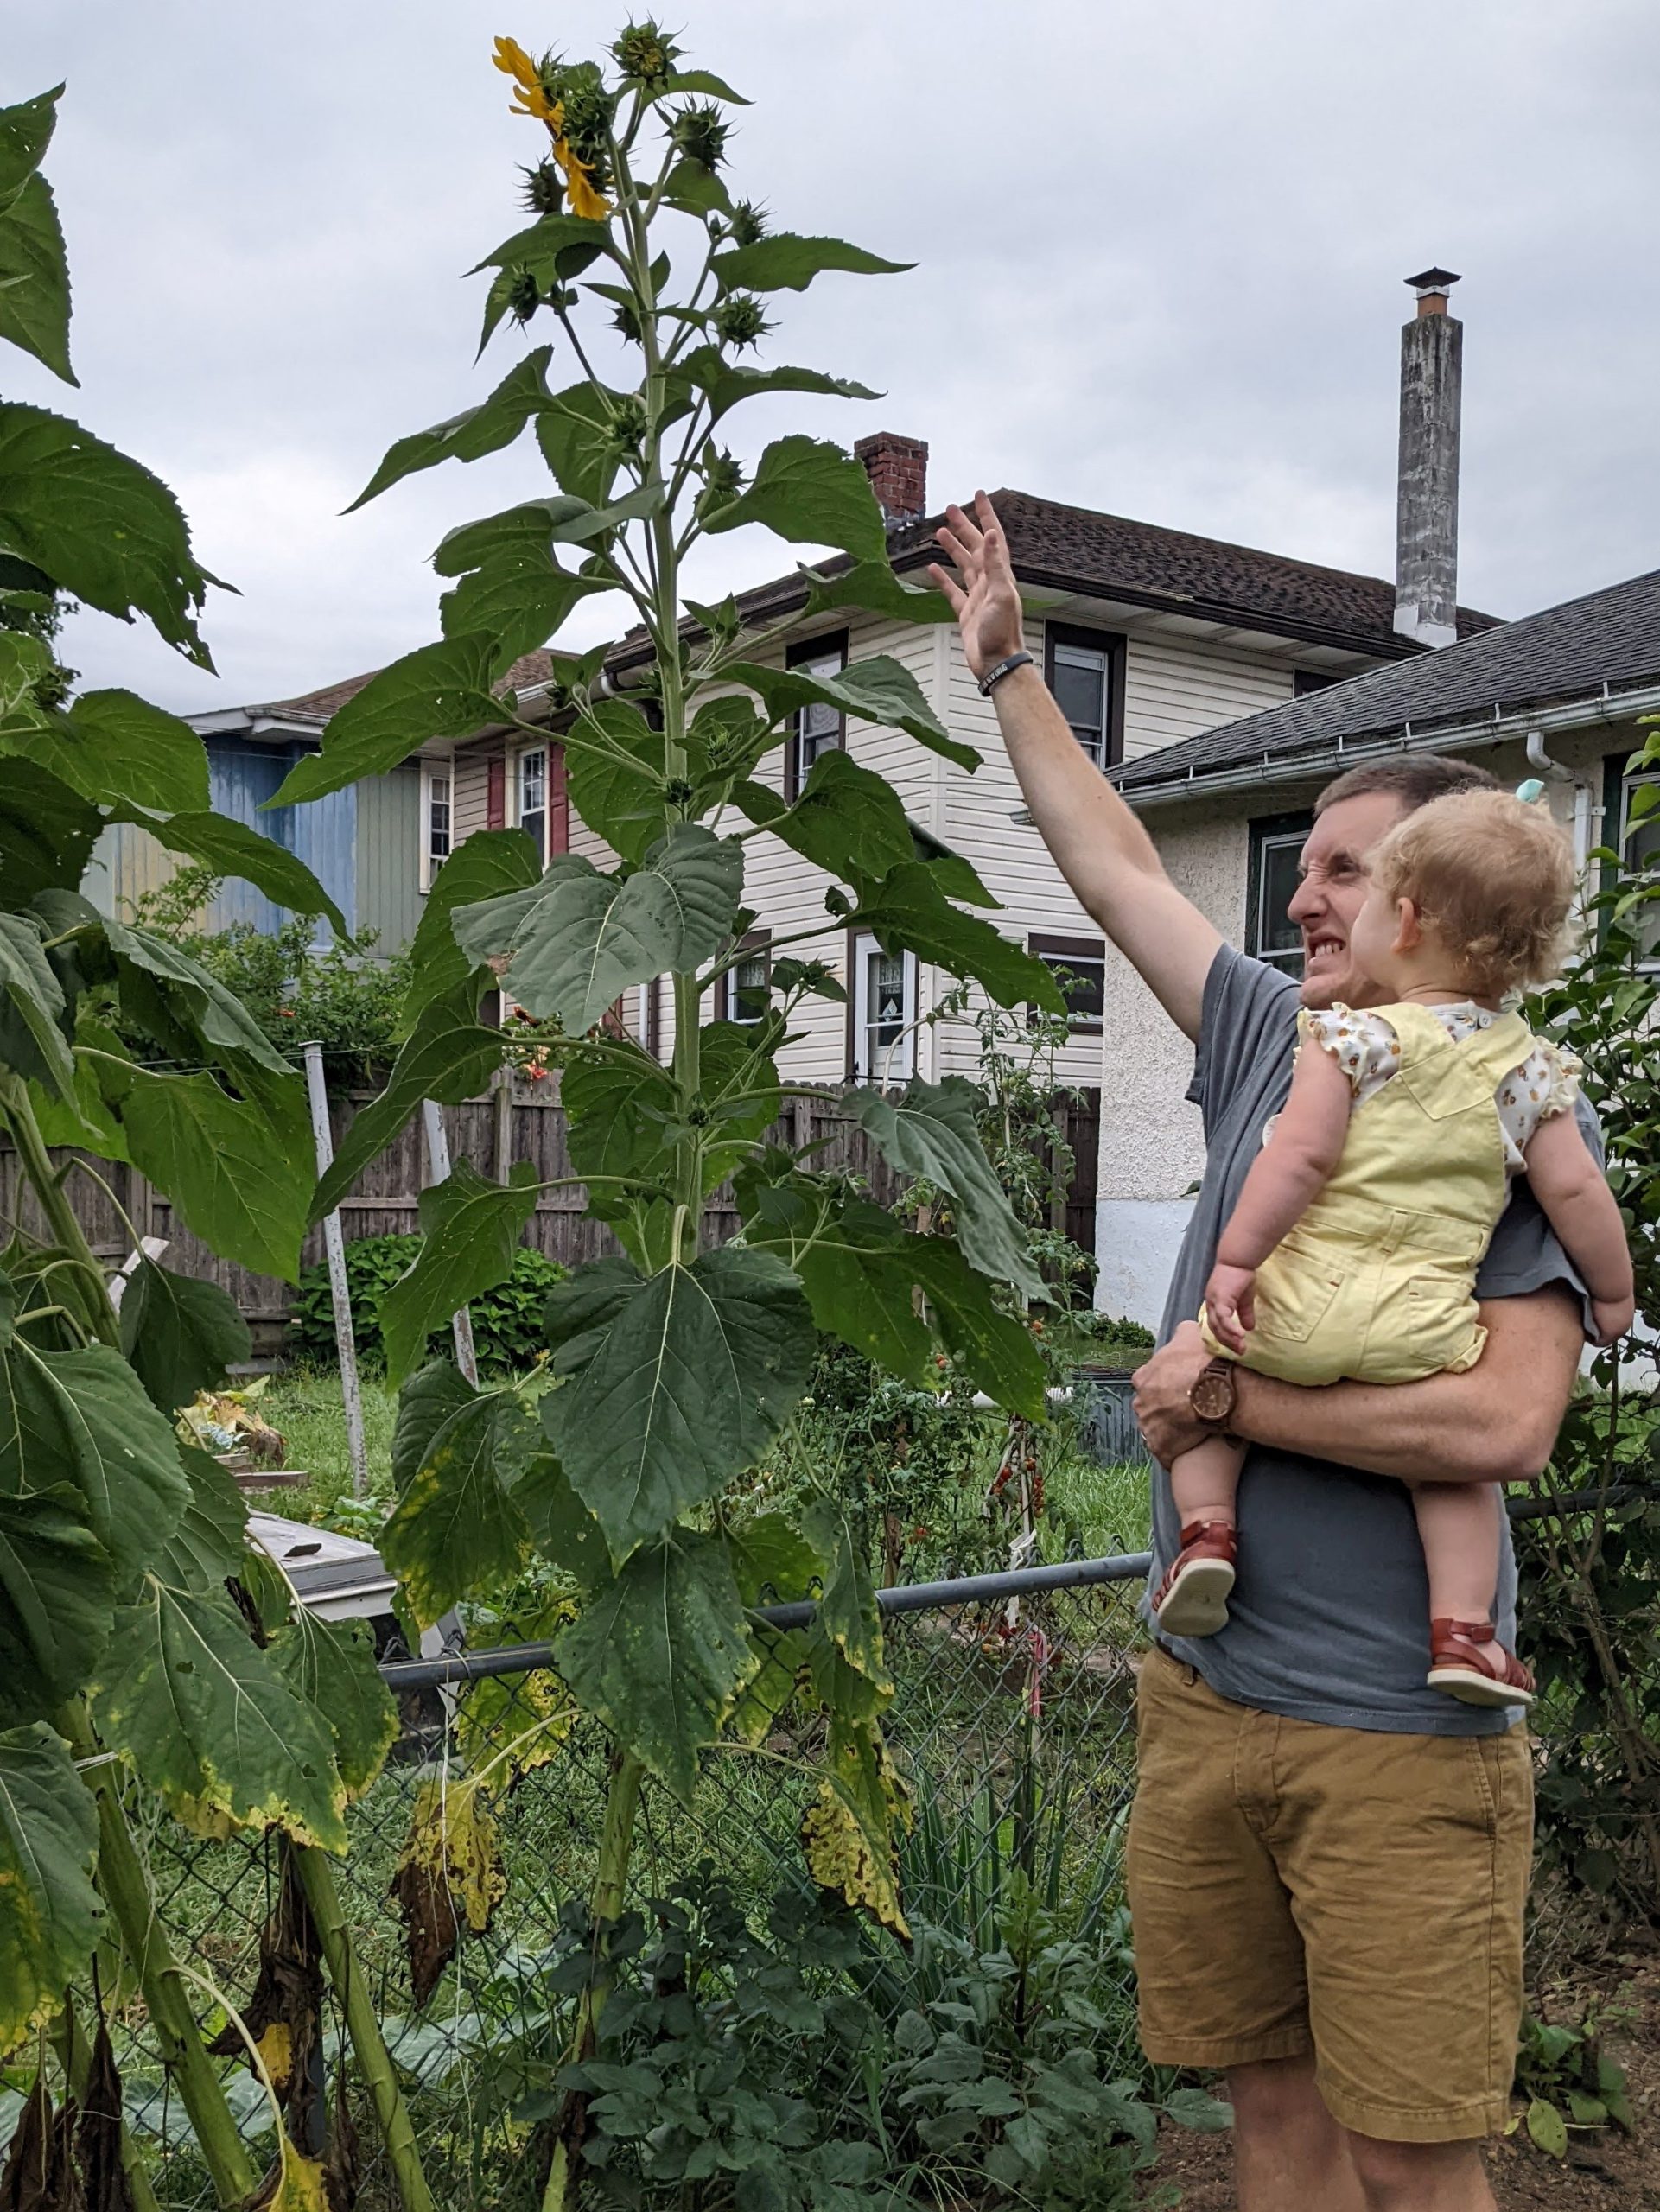 man holding a child reaching for a tall sunflower